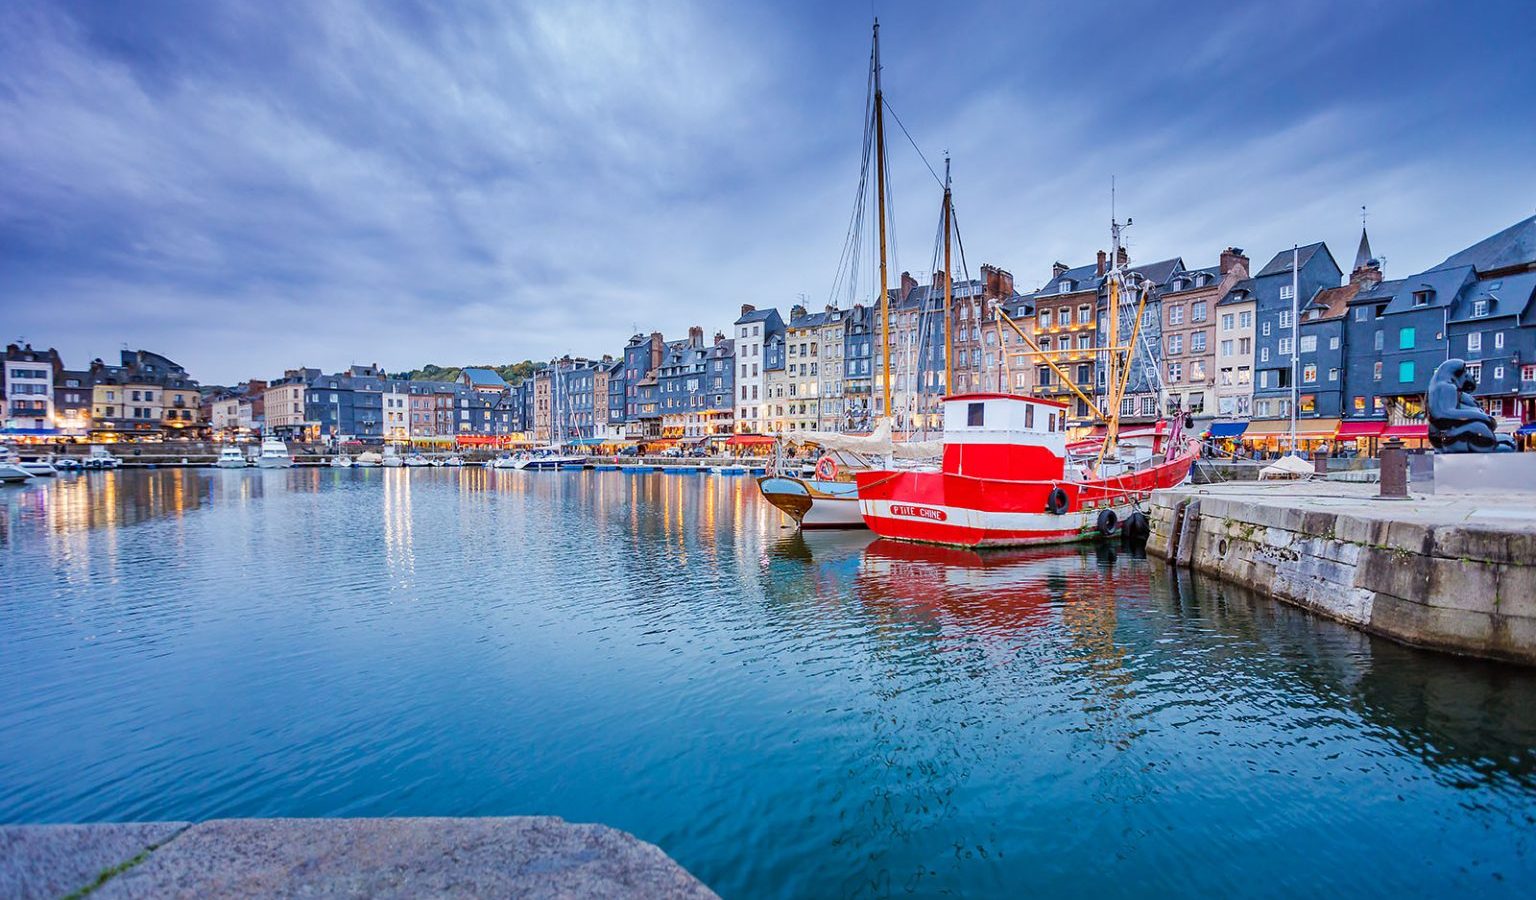 Discover Normandy